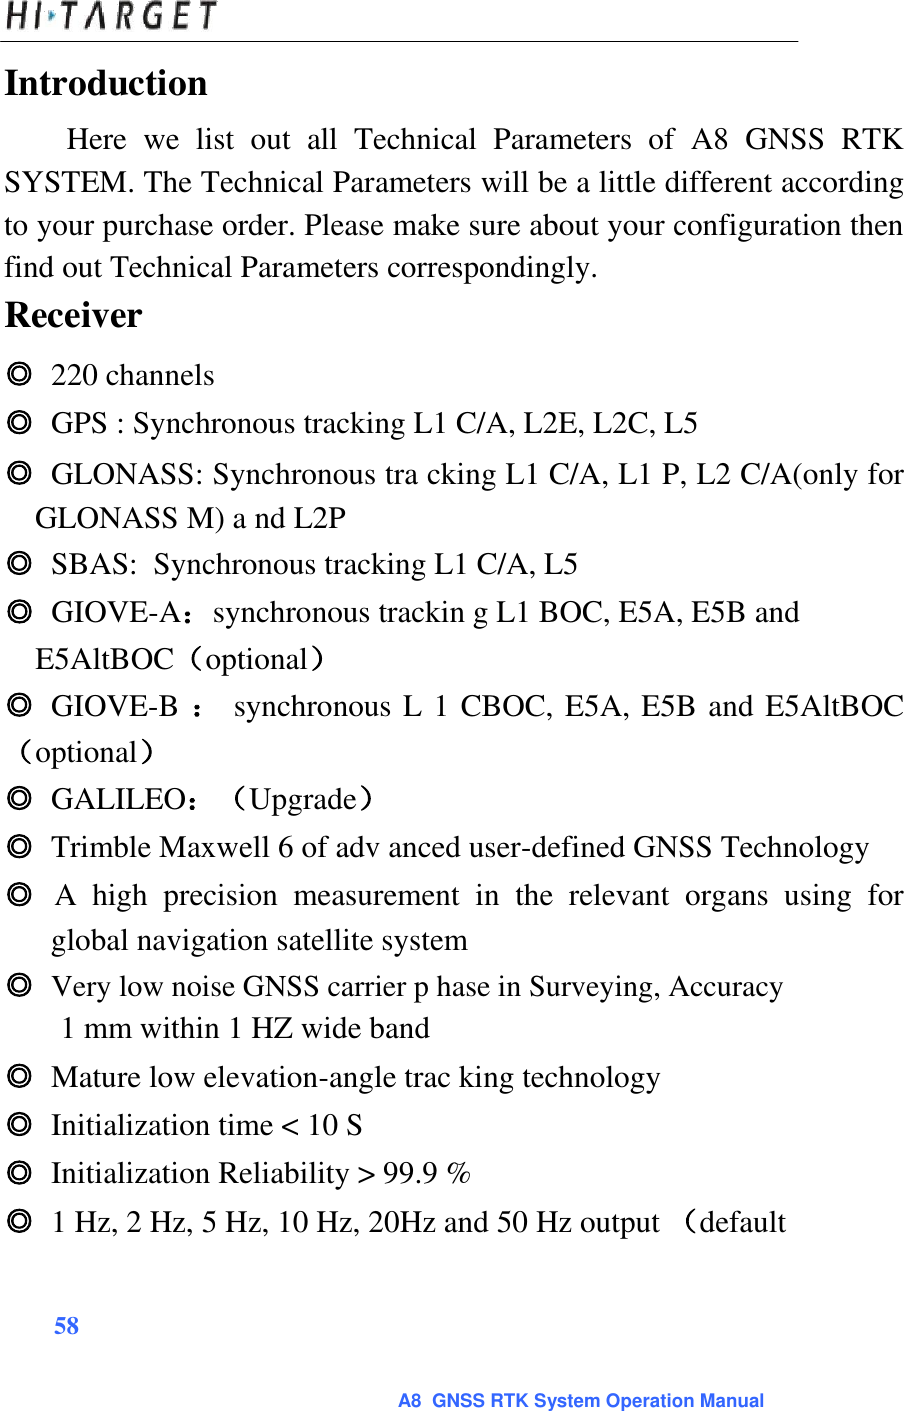  Introduction  Here  we  list  out  all  Technical  Parameters  of  A8  GNSS  RTK SYSTEM. The Technical Parameters will be a little different according to your purchase order. Please make sure about your configuration then find out Technical Parameters correspondingly.  Receiver  ◎ 220 channels  ◎ GPS : Synchronous tracking L1 C/A, L2E, L2C, L5  ◎ GLONASS: Synchronous tra cking L1 C/A, L1 P, L2 C/A(only for GLONASS M) a nd L2P  ◎ SBAS:  Synchronous tracking L1 C/A, L5  ◎ GIOVE-A：synchronous trackin g L1 BOC, E5A, E5B and E5AltBOC（optional）  ◎ GIOVE-B ： synchronous L 1 CBOC, E5A, E5B and E5AltBOC（optional） ◎ GALILEO：（Upgrade）  ◎ Trimble Maxwell 6 of adv anced user-defined GNSS Technology  ◎ A  high  precision  measurement  in  the  relevant  organs  using  for global navigation satellite system  ◎ Very low noise GNSS carrier p hase in Surveying, Accuracy   1 mm within 1 HZ wide band  ◎ Mature low elevation-angle trac king technology  ◎ Initialization time &lt; 10 S  ◎ Initialization Reliability &gt; 99.9 %  ◎ 1 Hz, 2 Hz, 5 Hz, 10 Hz, 20Hz and 50 Hz output （default    58   A8  GNSS RTK System Operation Manual 